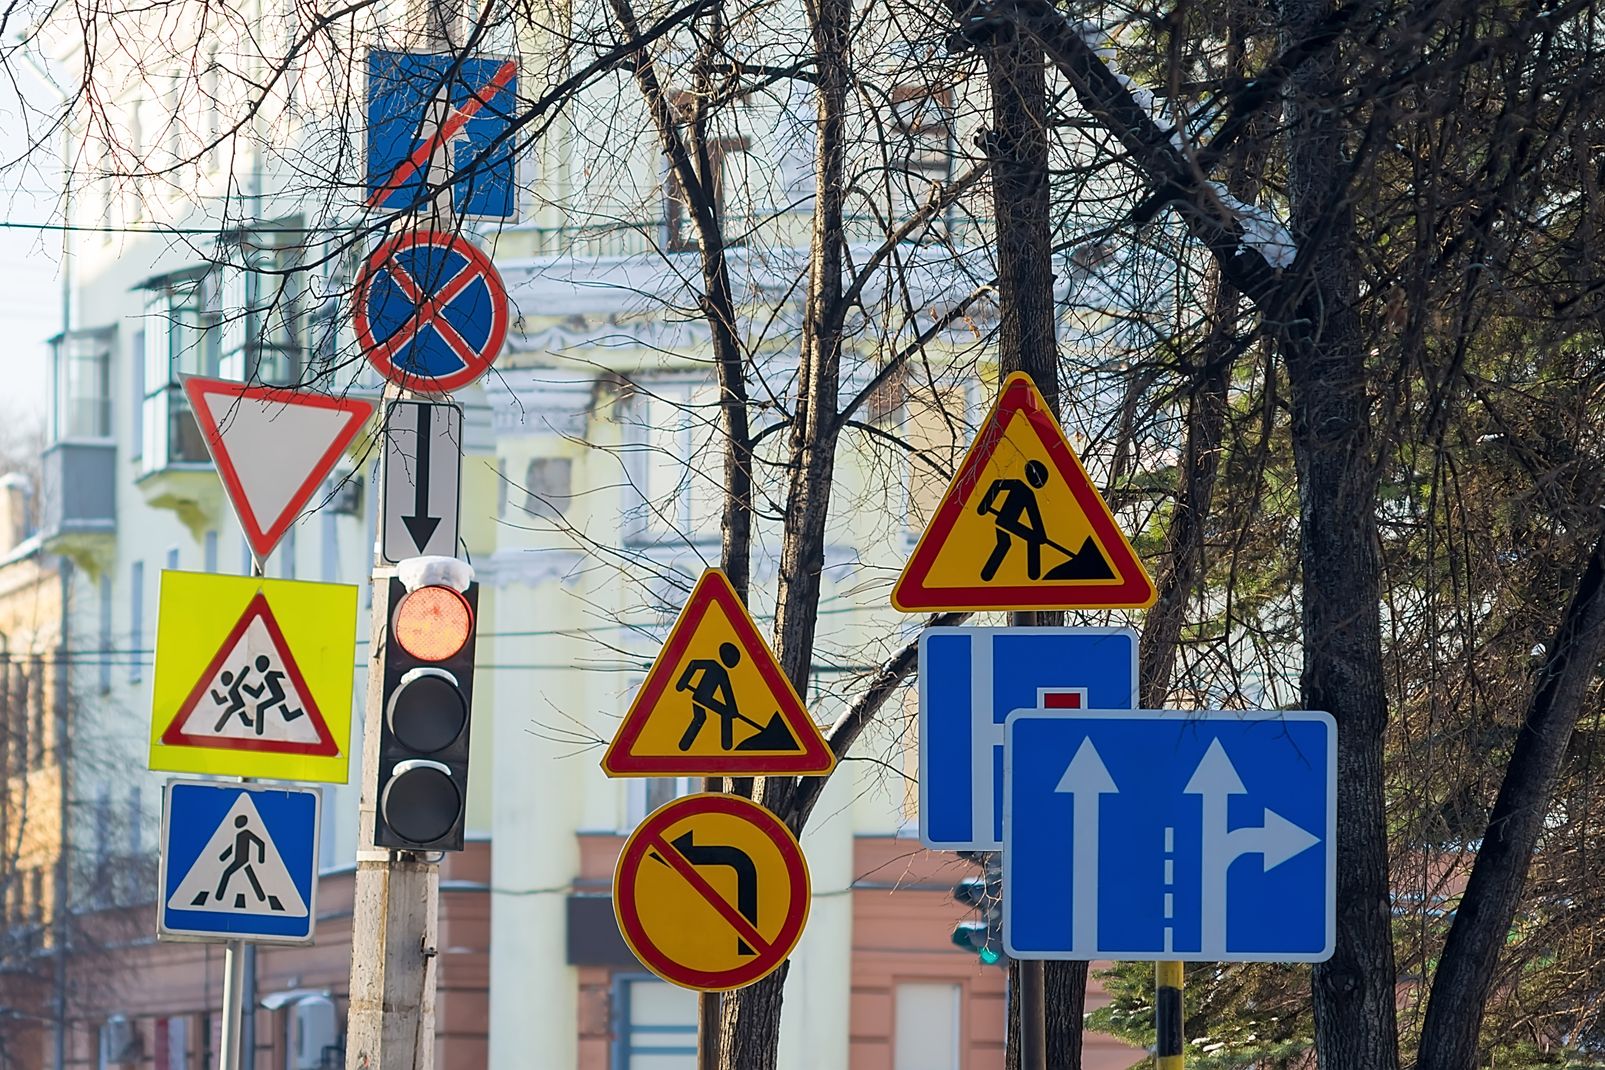 Mobileye's computer vision technology is trained to identify signage used in countries across Europe and around the world.